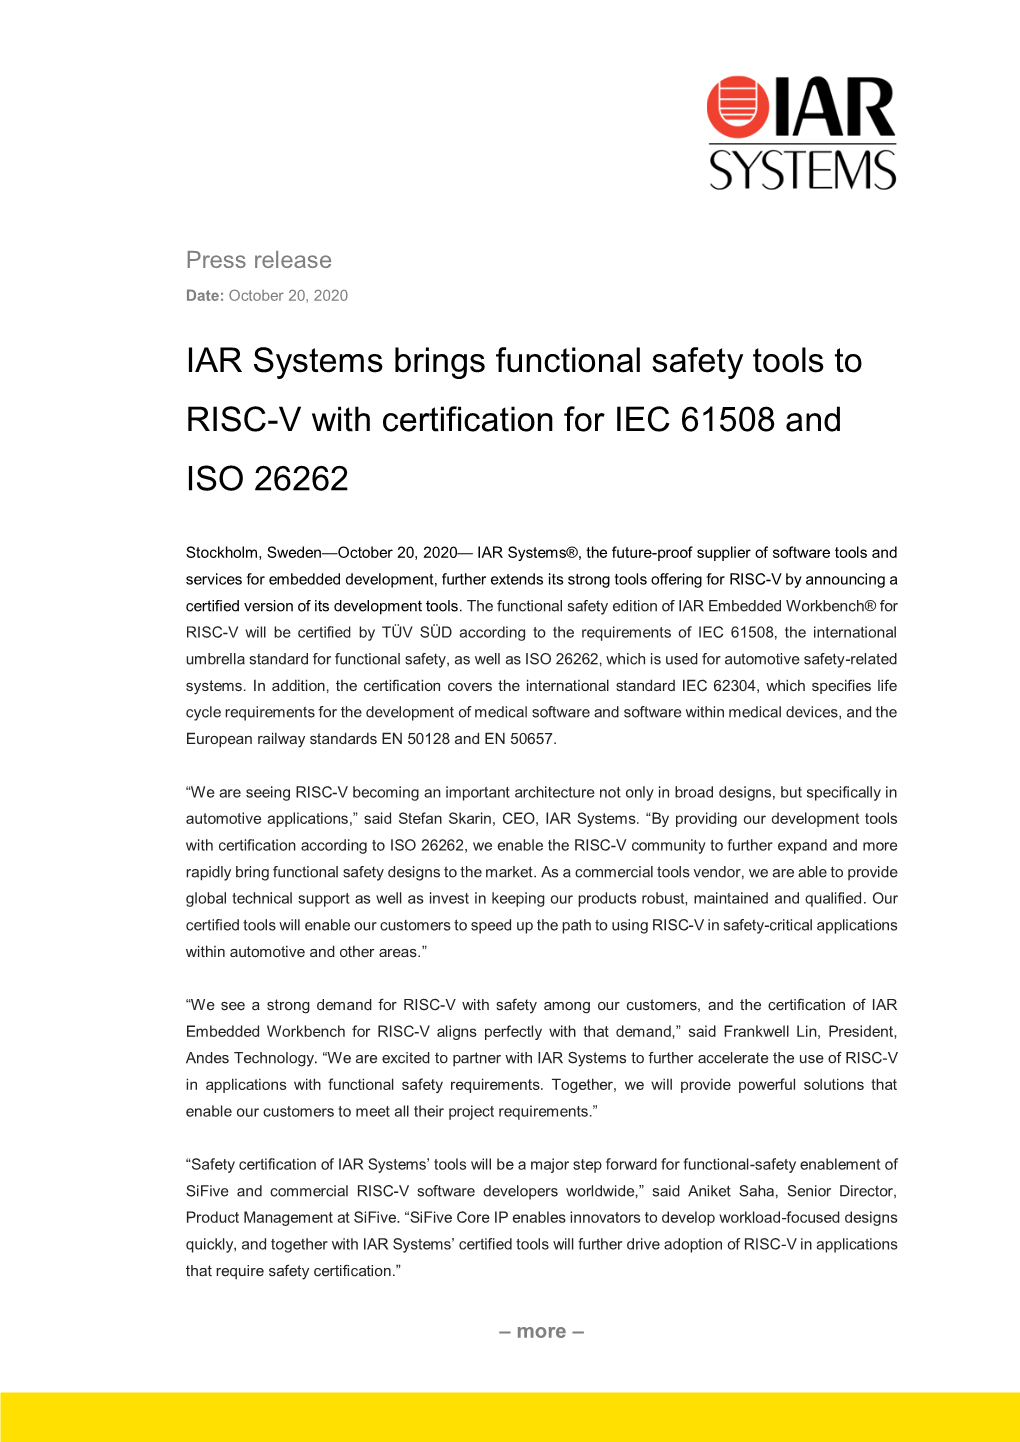 IAR Systems Brings Functional Safety Tools to RISC-V with Certification for IEC 61508 and ISO 26262